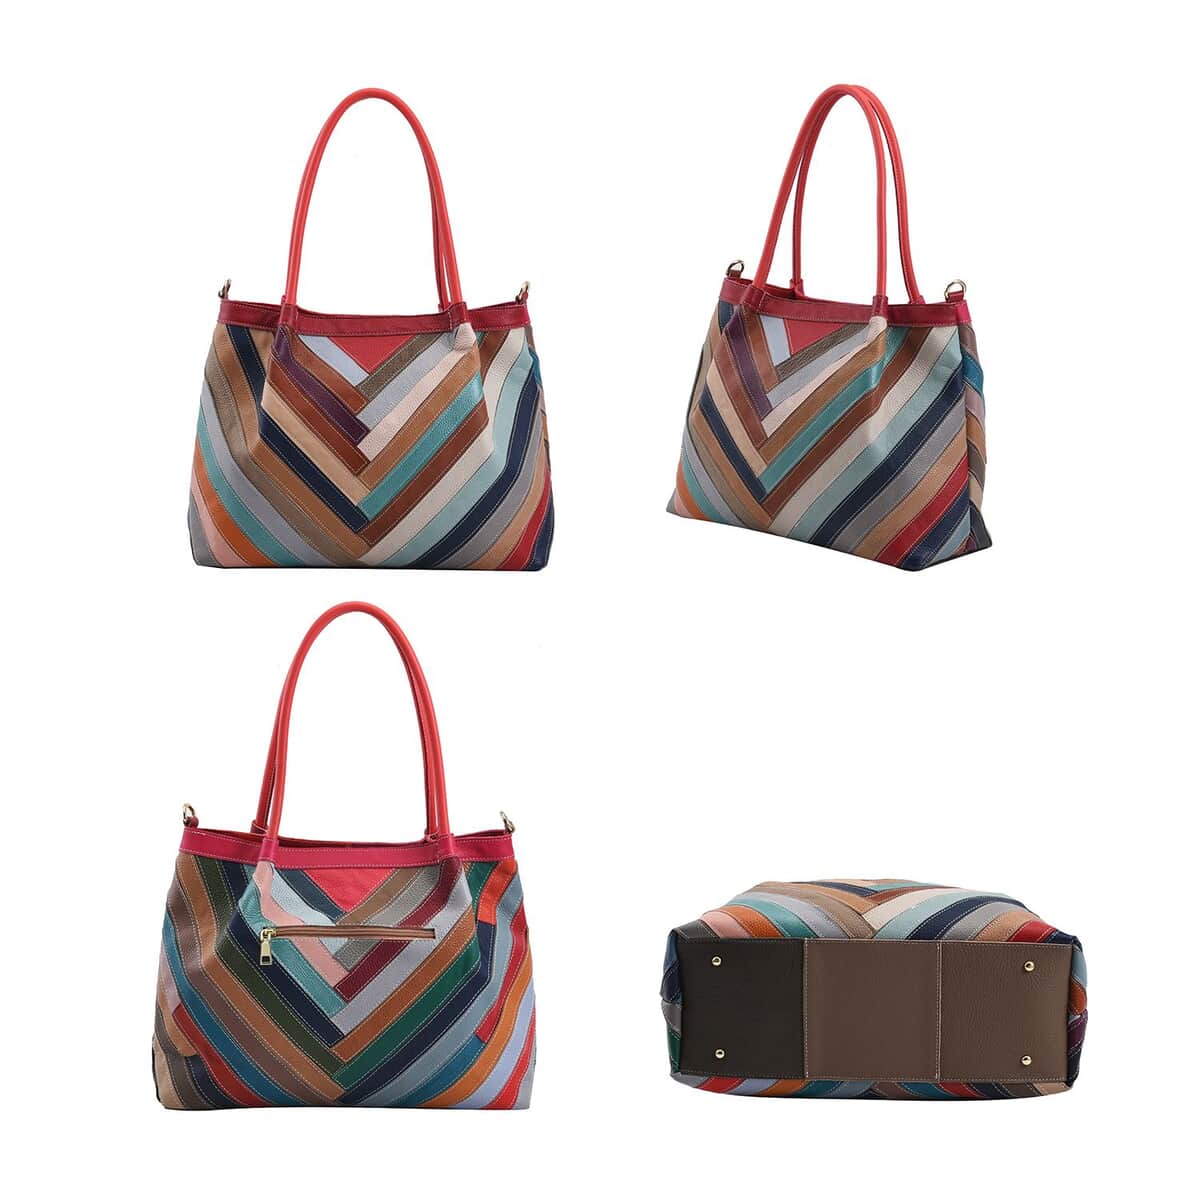 Rainbow Color Chevron Pattern Genuine Leather Tote Bag (14.96"x5.9"x11.81") with Long Strap image number 3